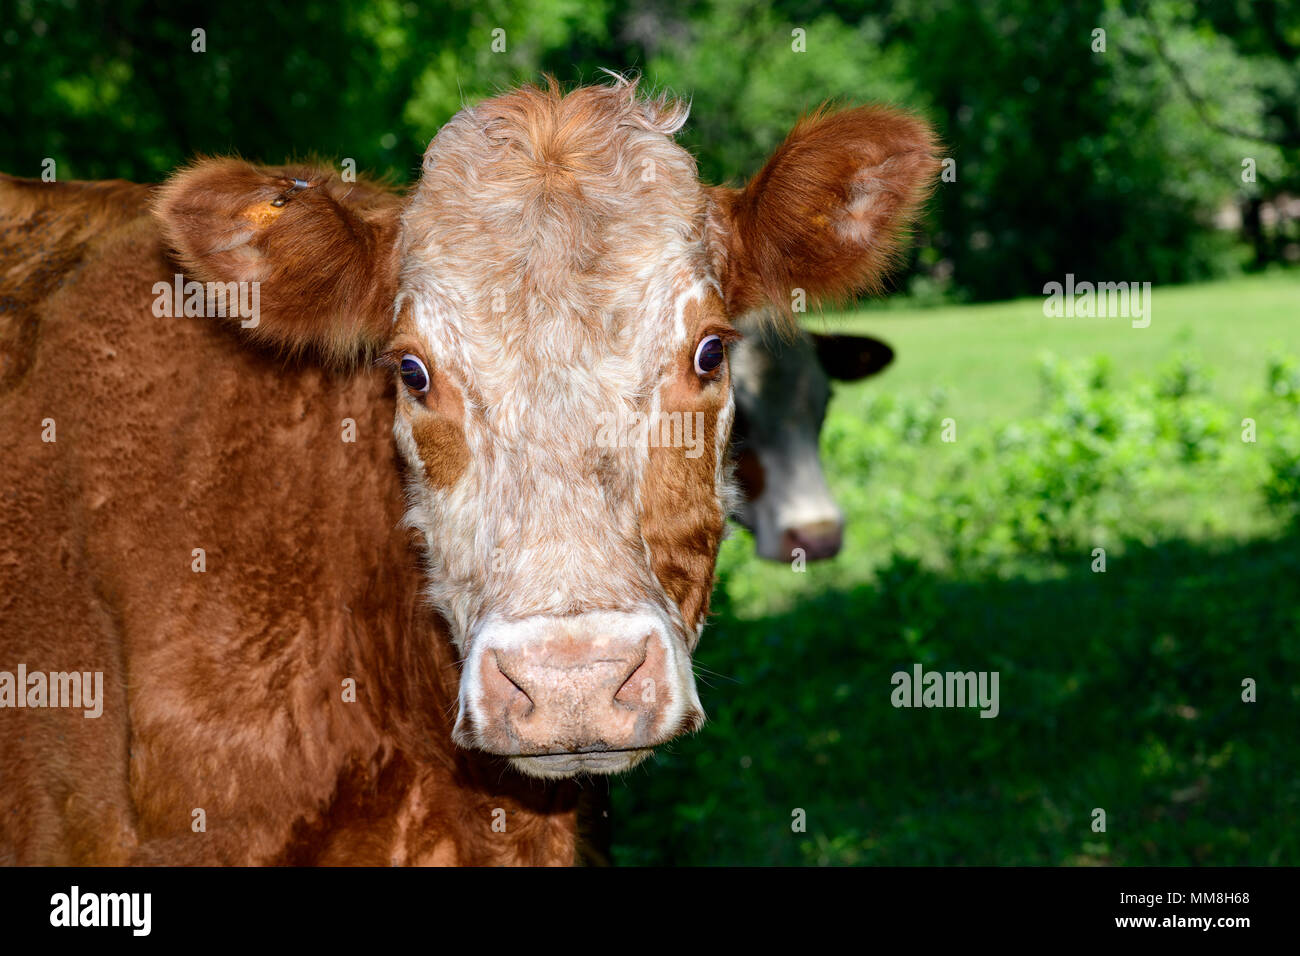 Hereford Cow Staring Expressively with surprised expression Stock Photo